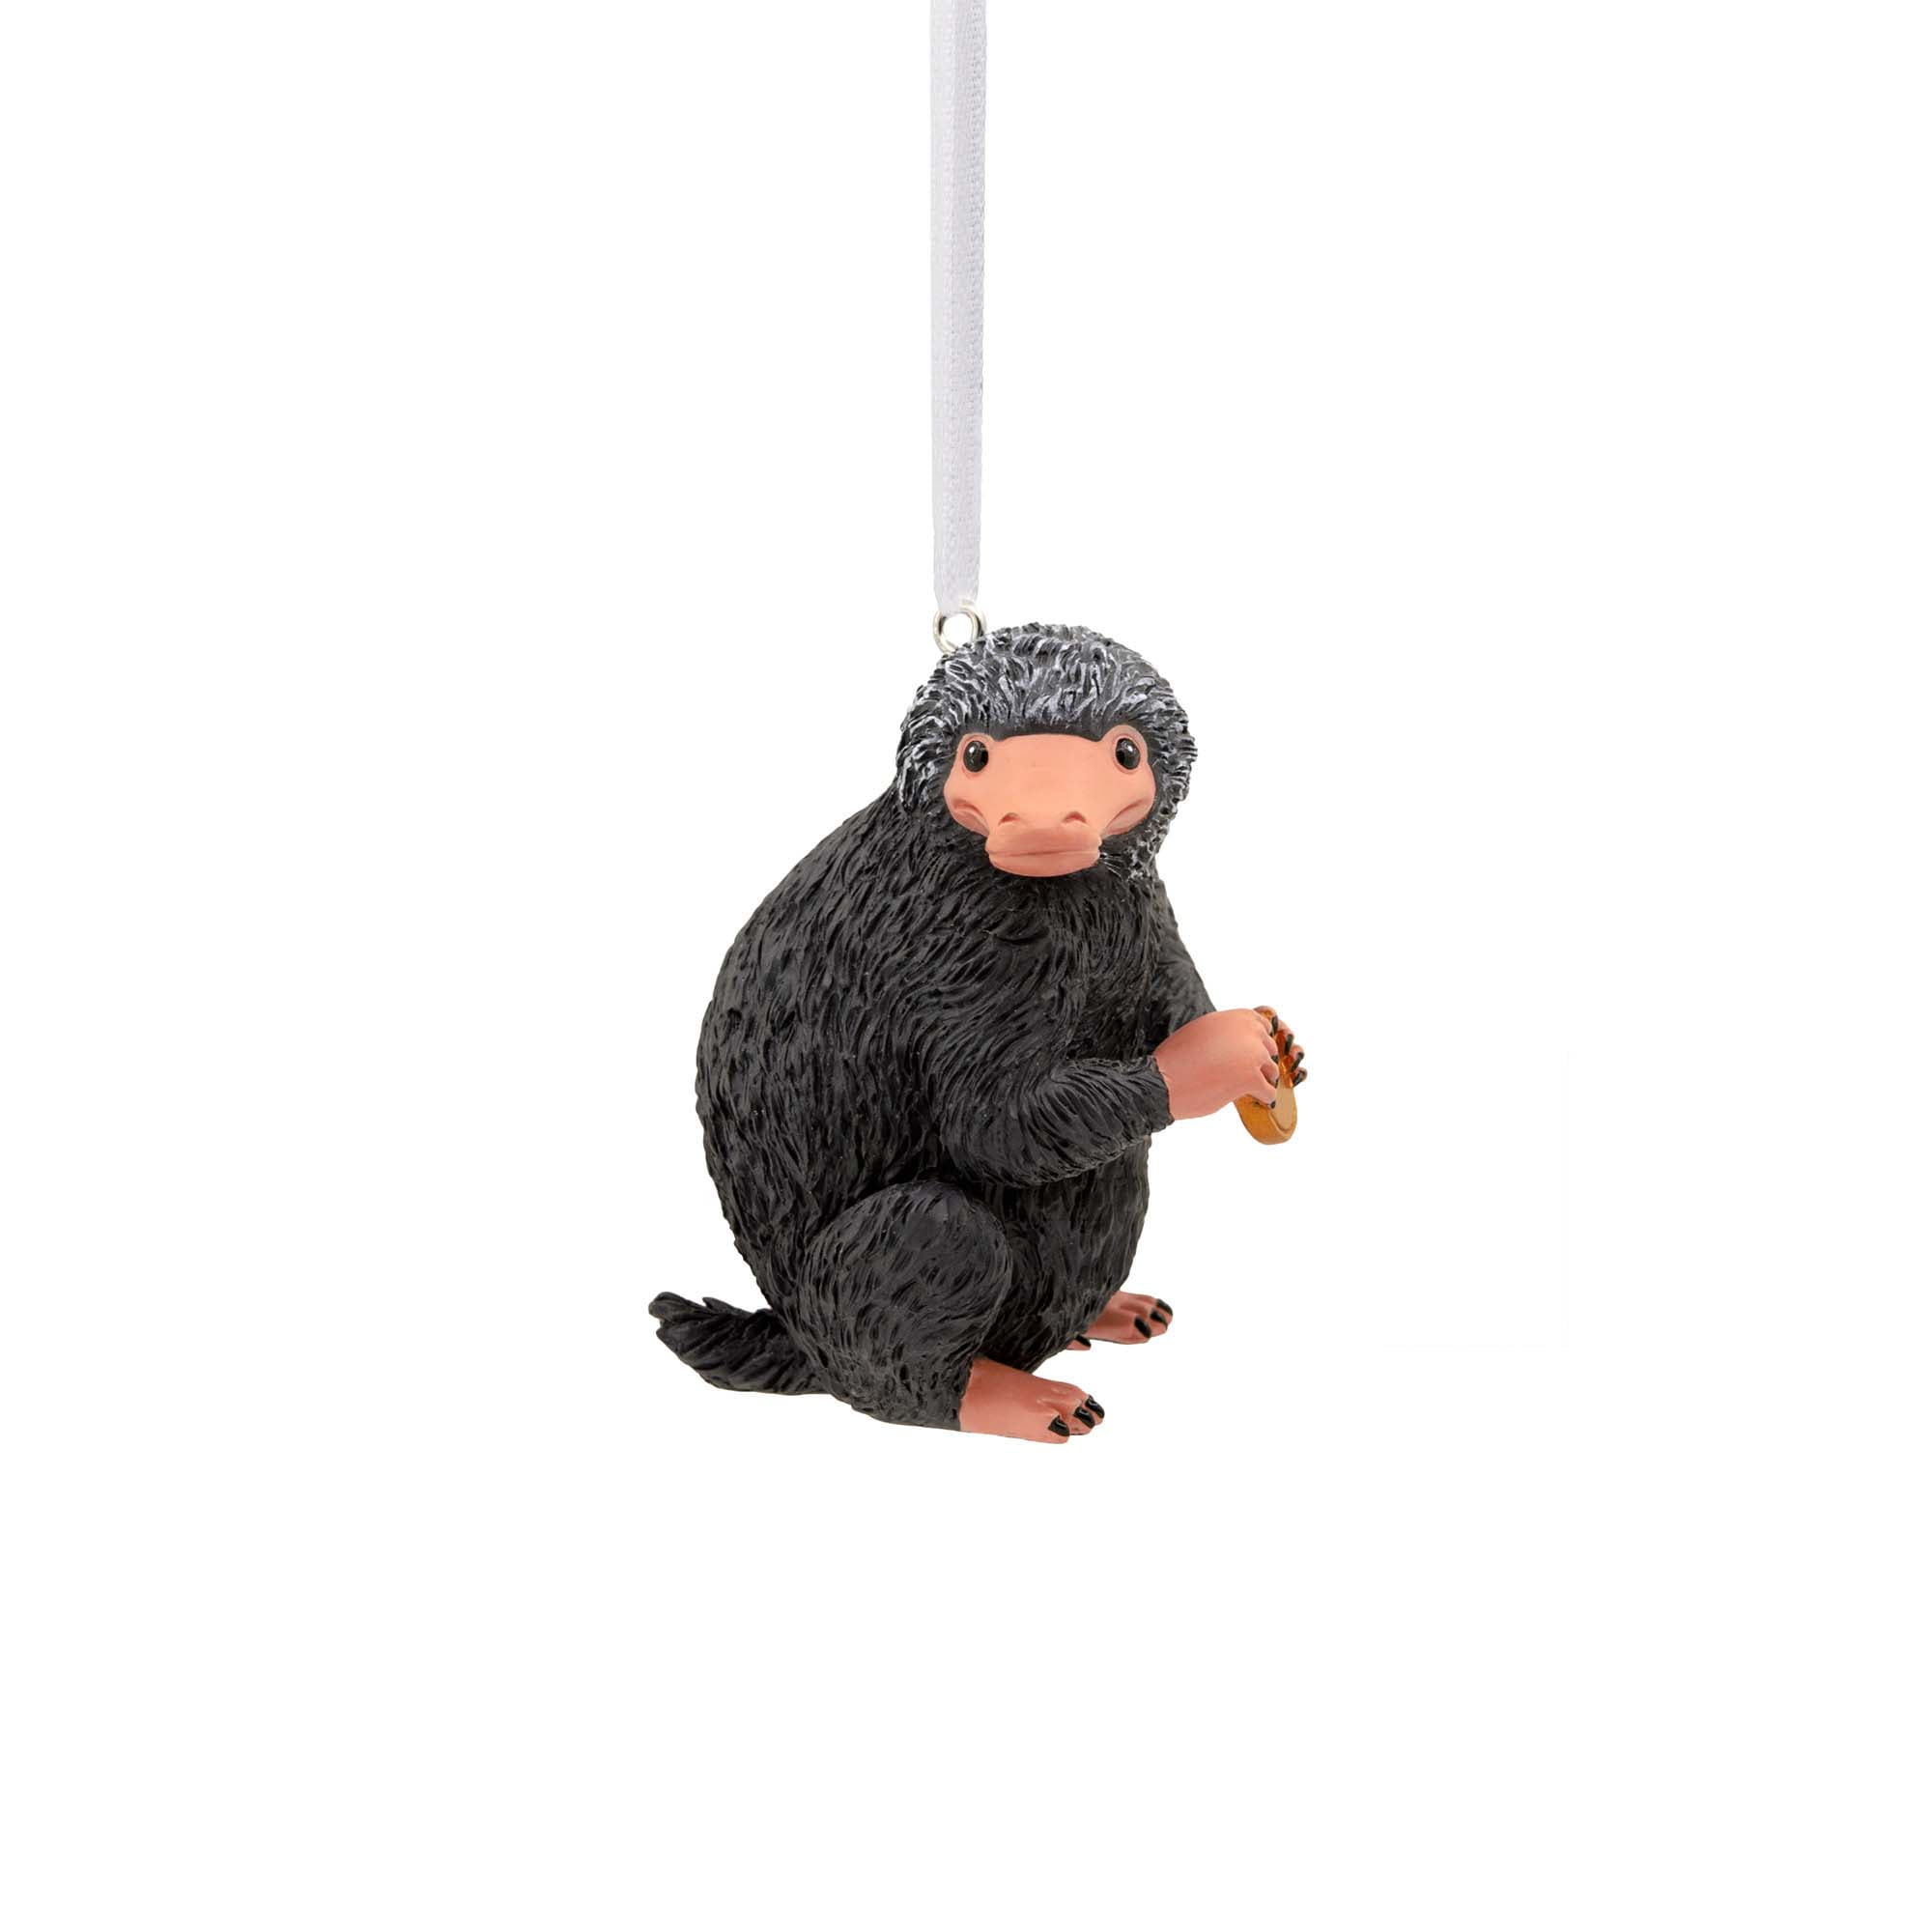 Hallmark Christmas Ornament Fantastic Beasts and Where to Find Them Niffler